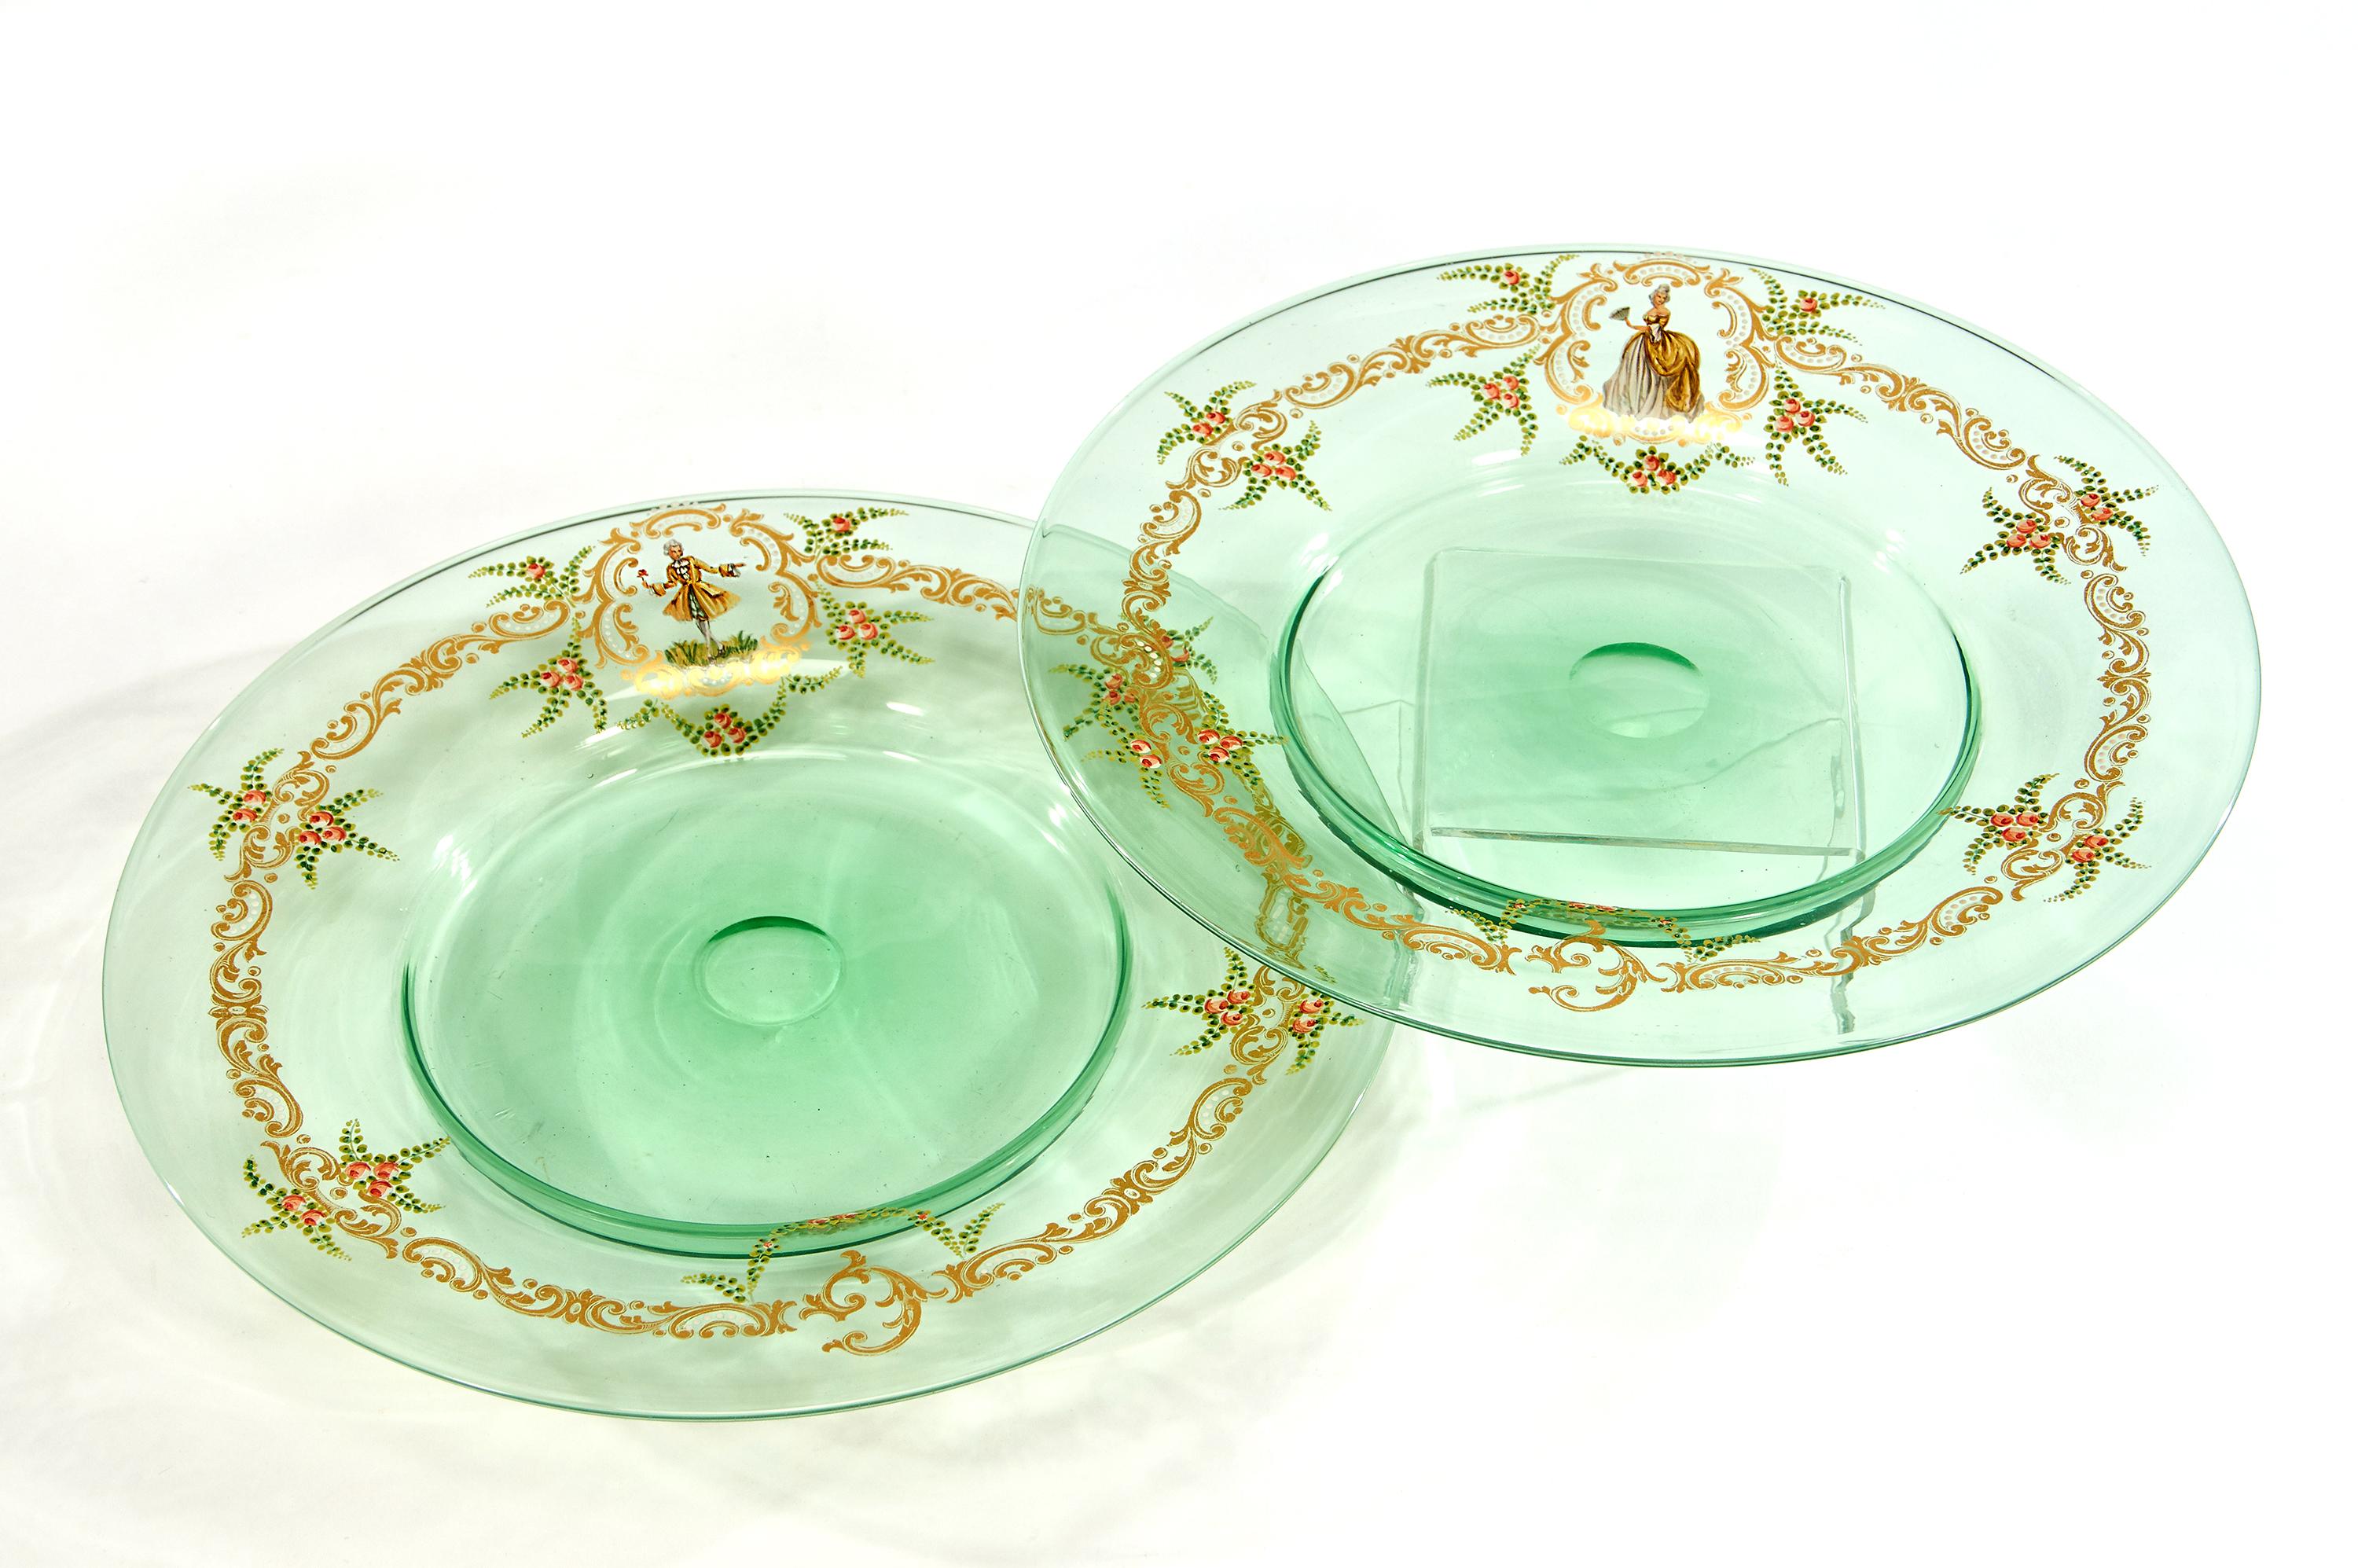 A rare set of 12 hand blown Venetian glass dinner plates/chargers, with exceptionally large diameter measuring 11 3/4